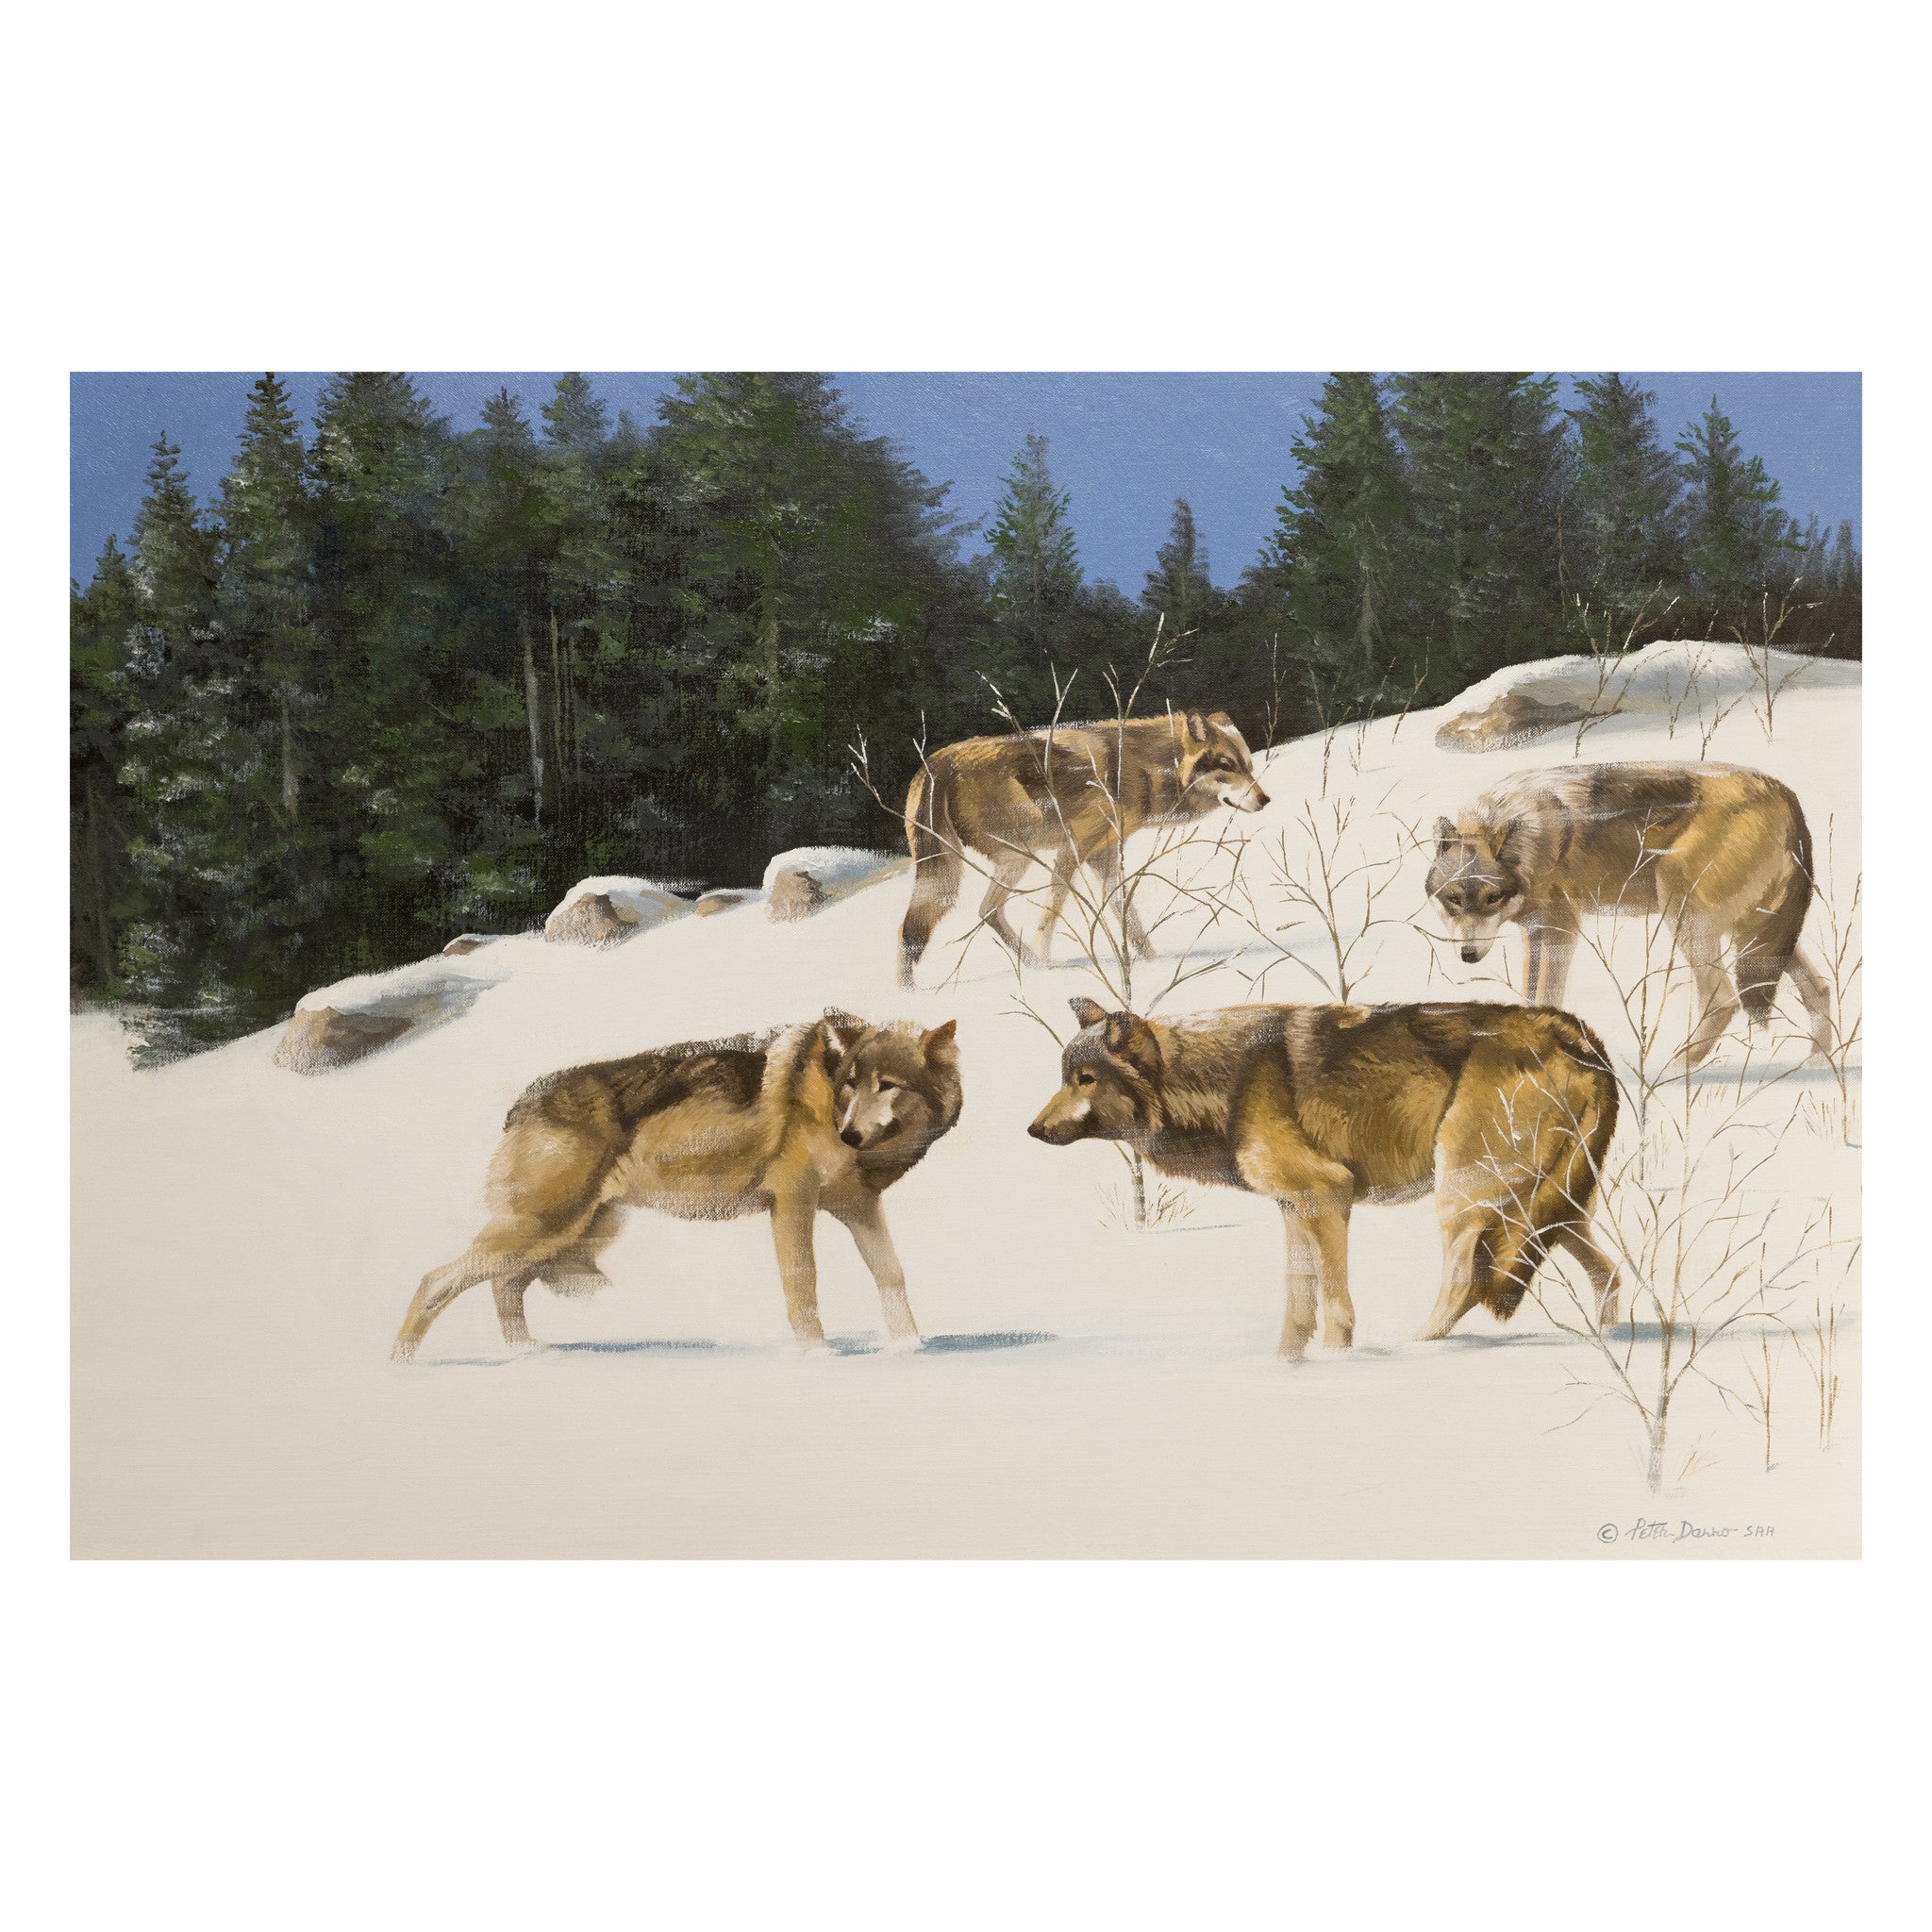 Pack of Wolves in the Snow by Peter Darro, Fine Art, Painting, Wildlife